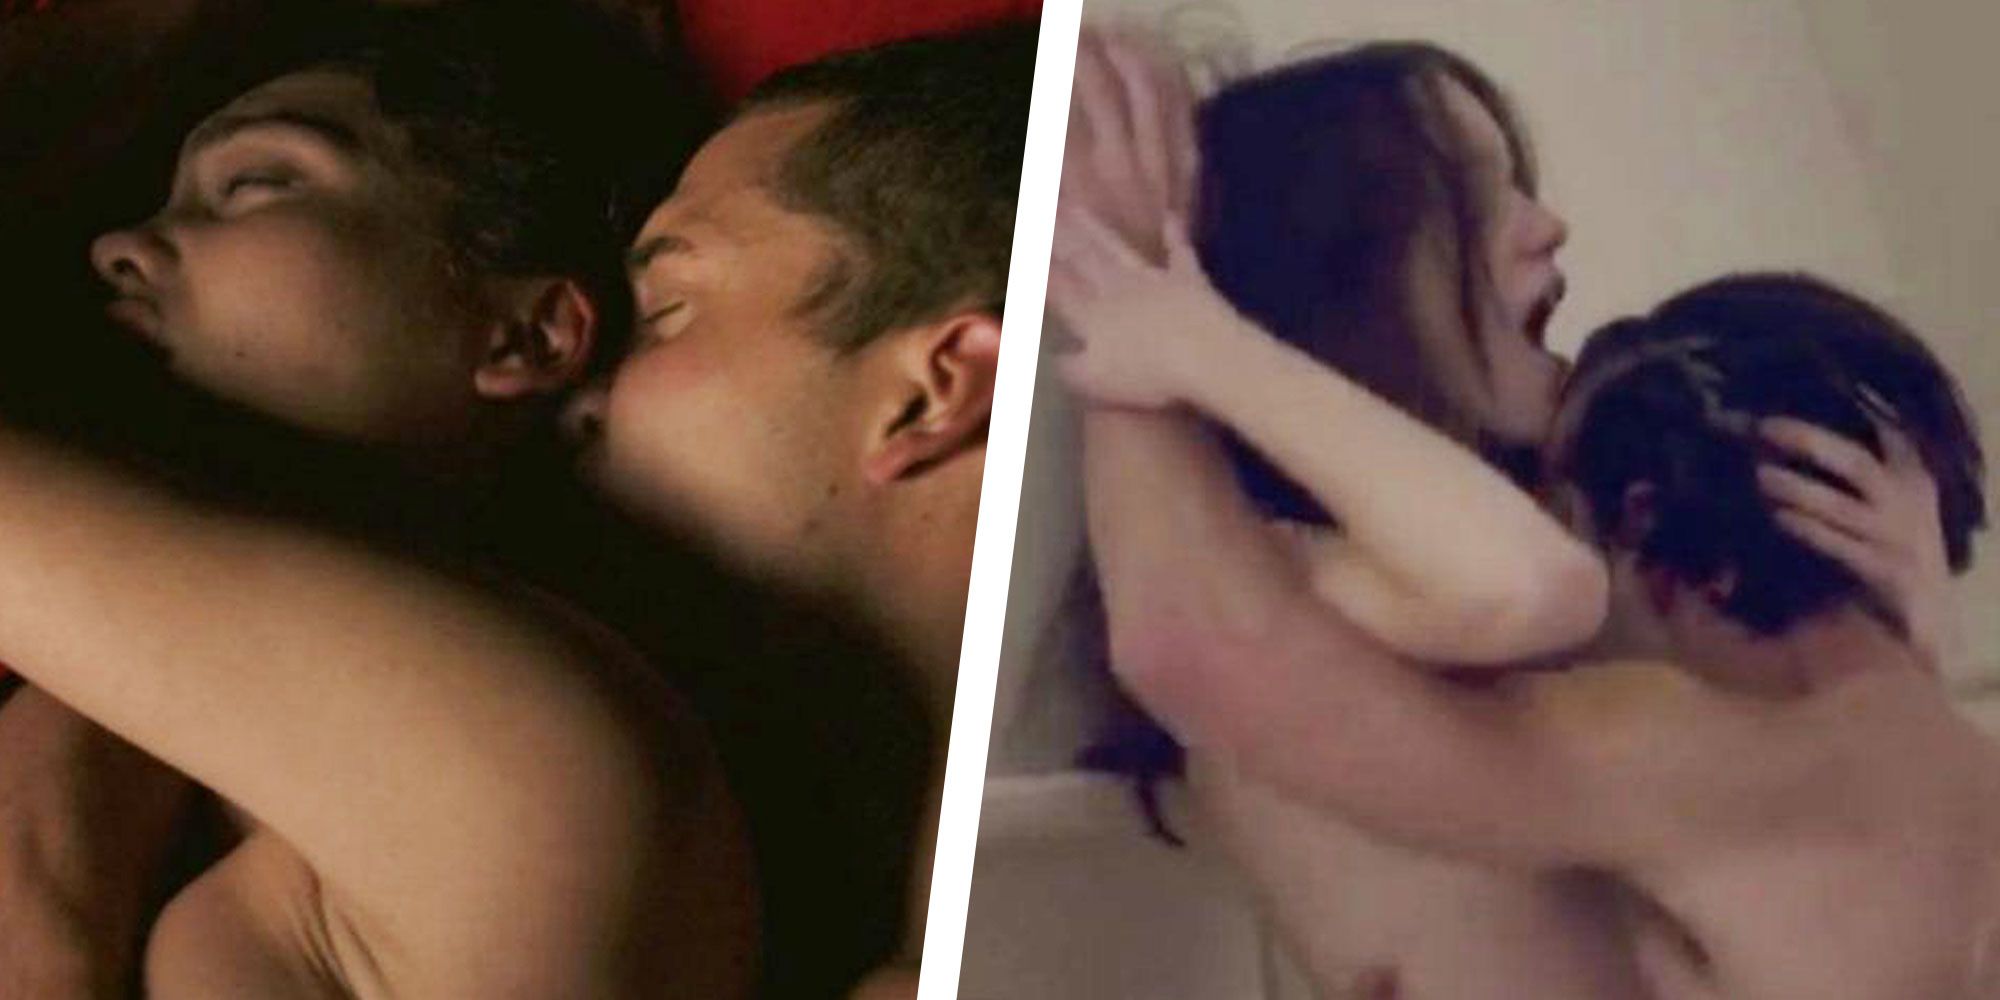 Movies sex scenes that were real